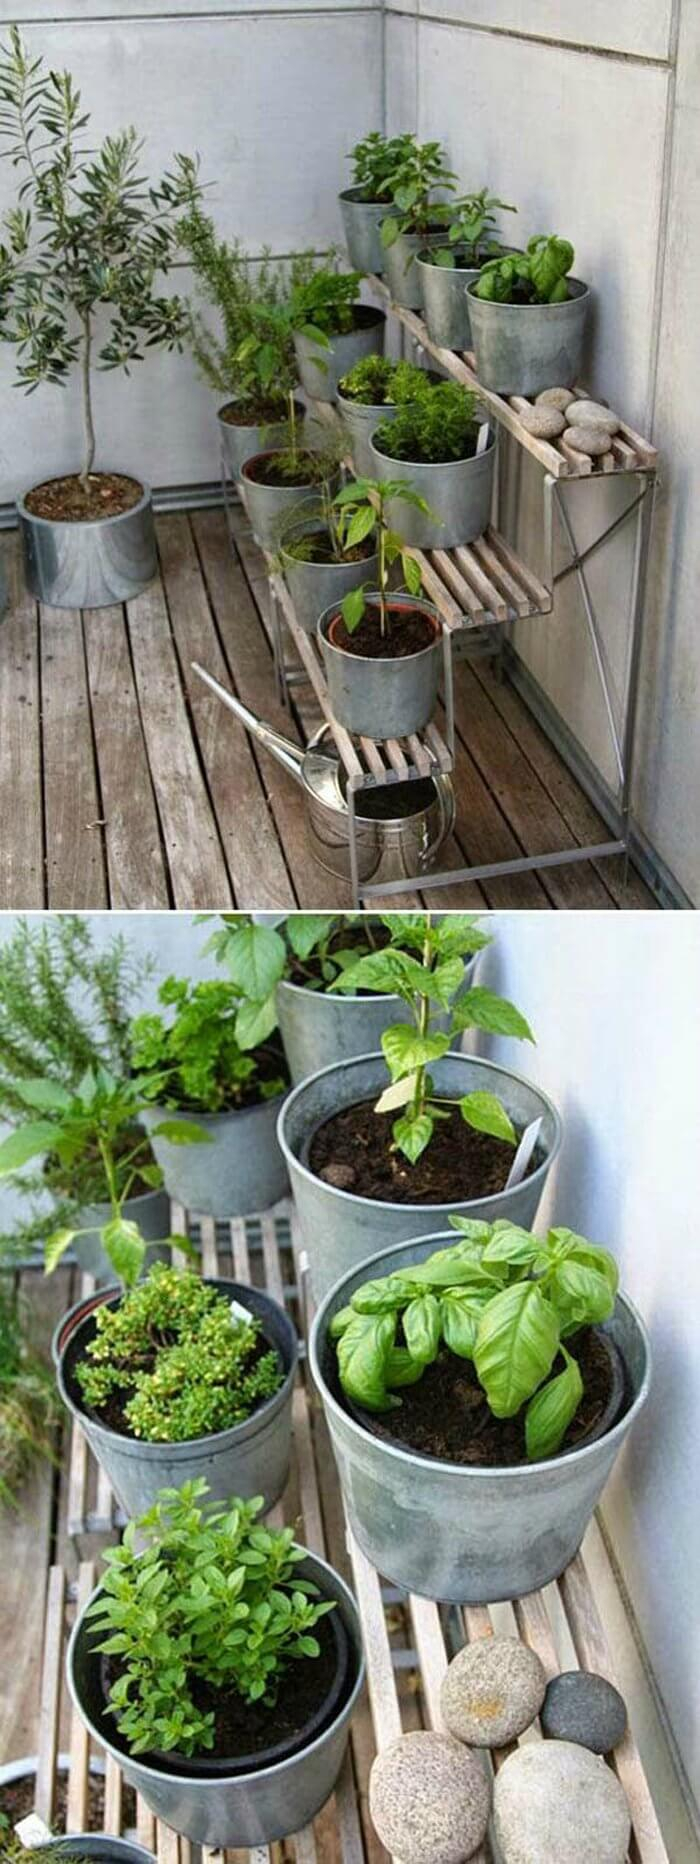 25 Best Herb Garden Ideas And Designs For 2019 in size 700 X 1864